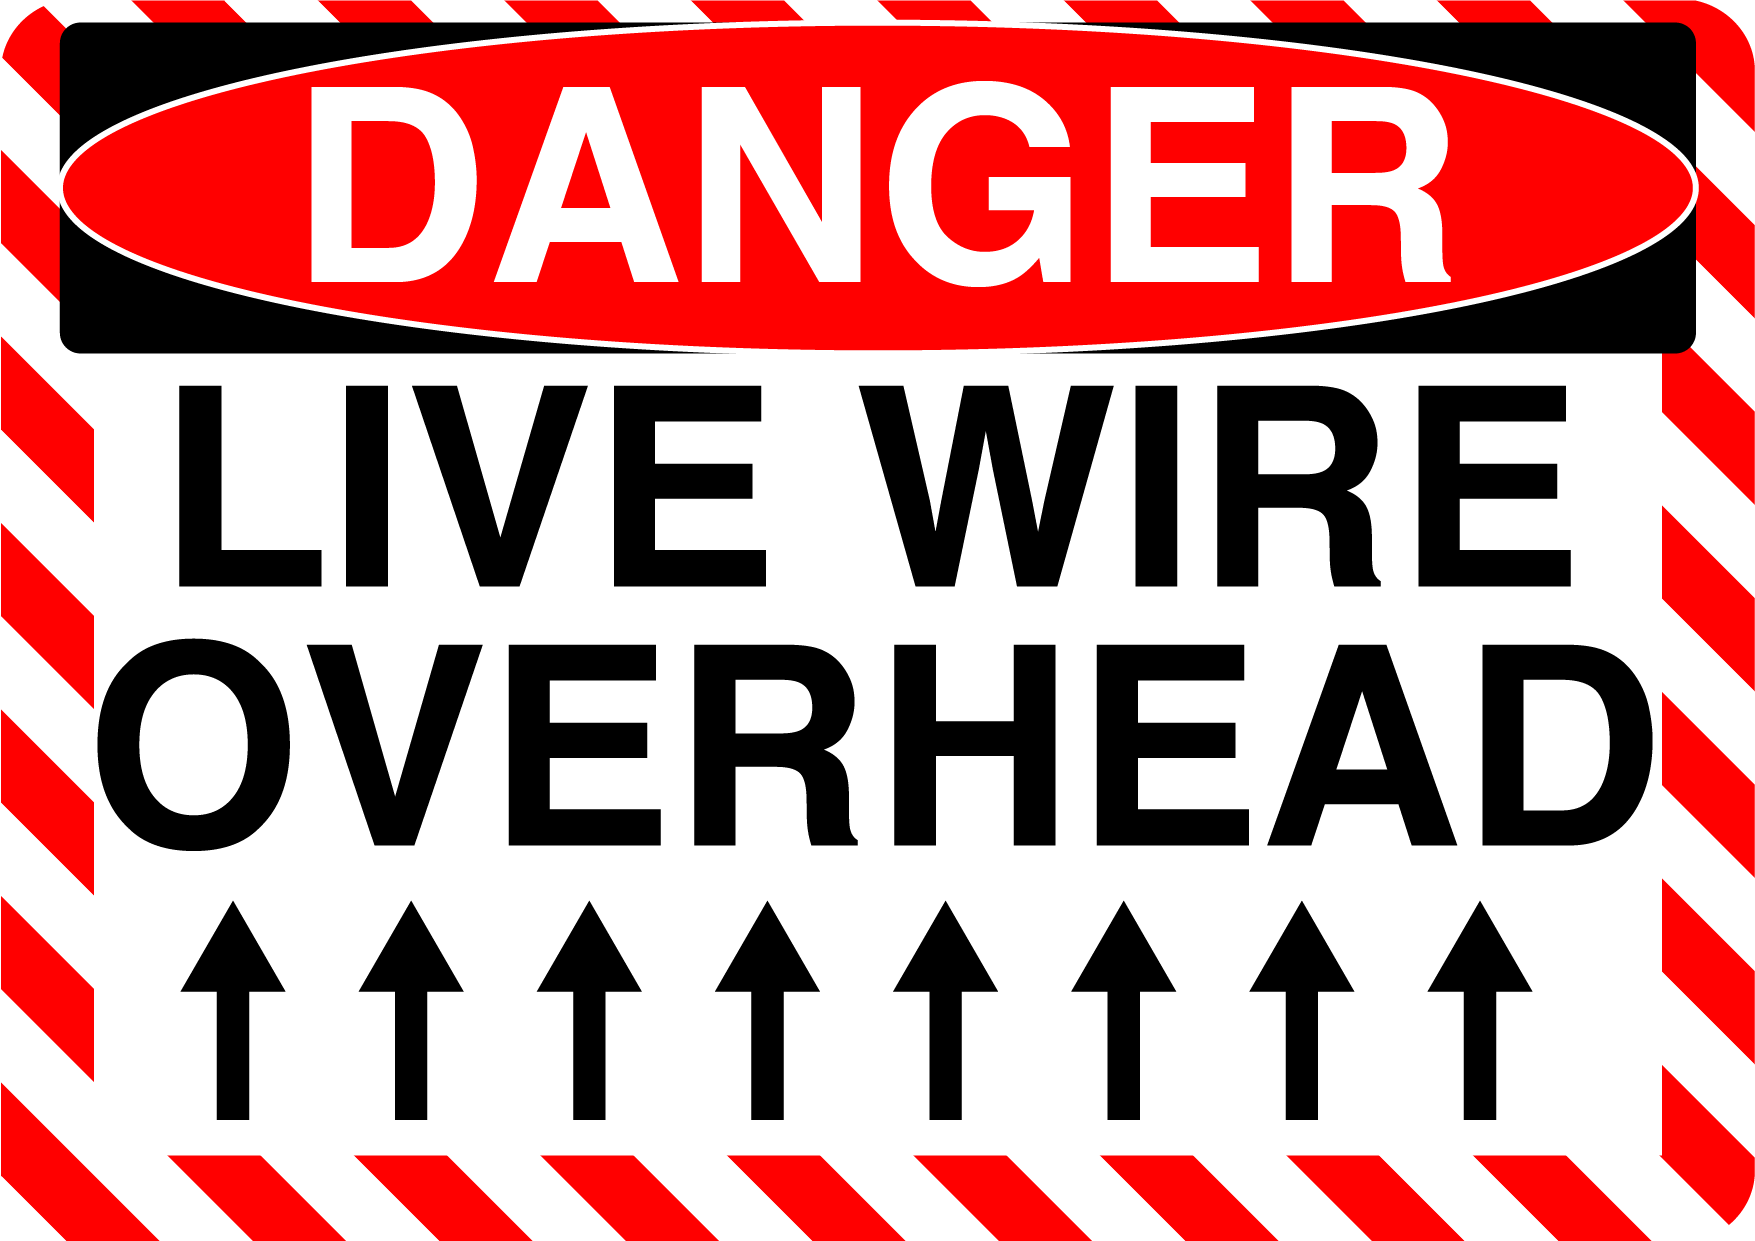 Danger "Live Wire Overhead" Durable Matte Laminated Vinyl Floor Sign- Various Sizes Available